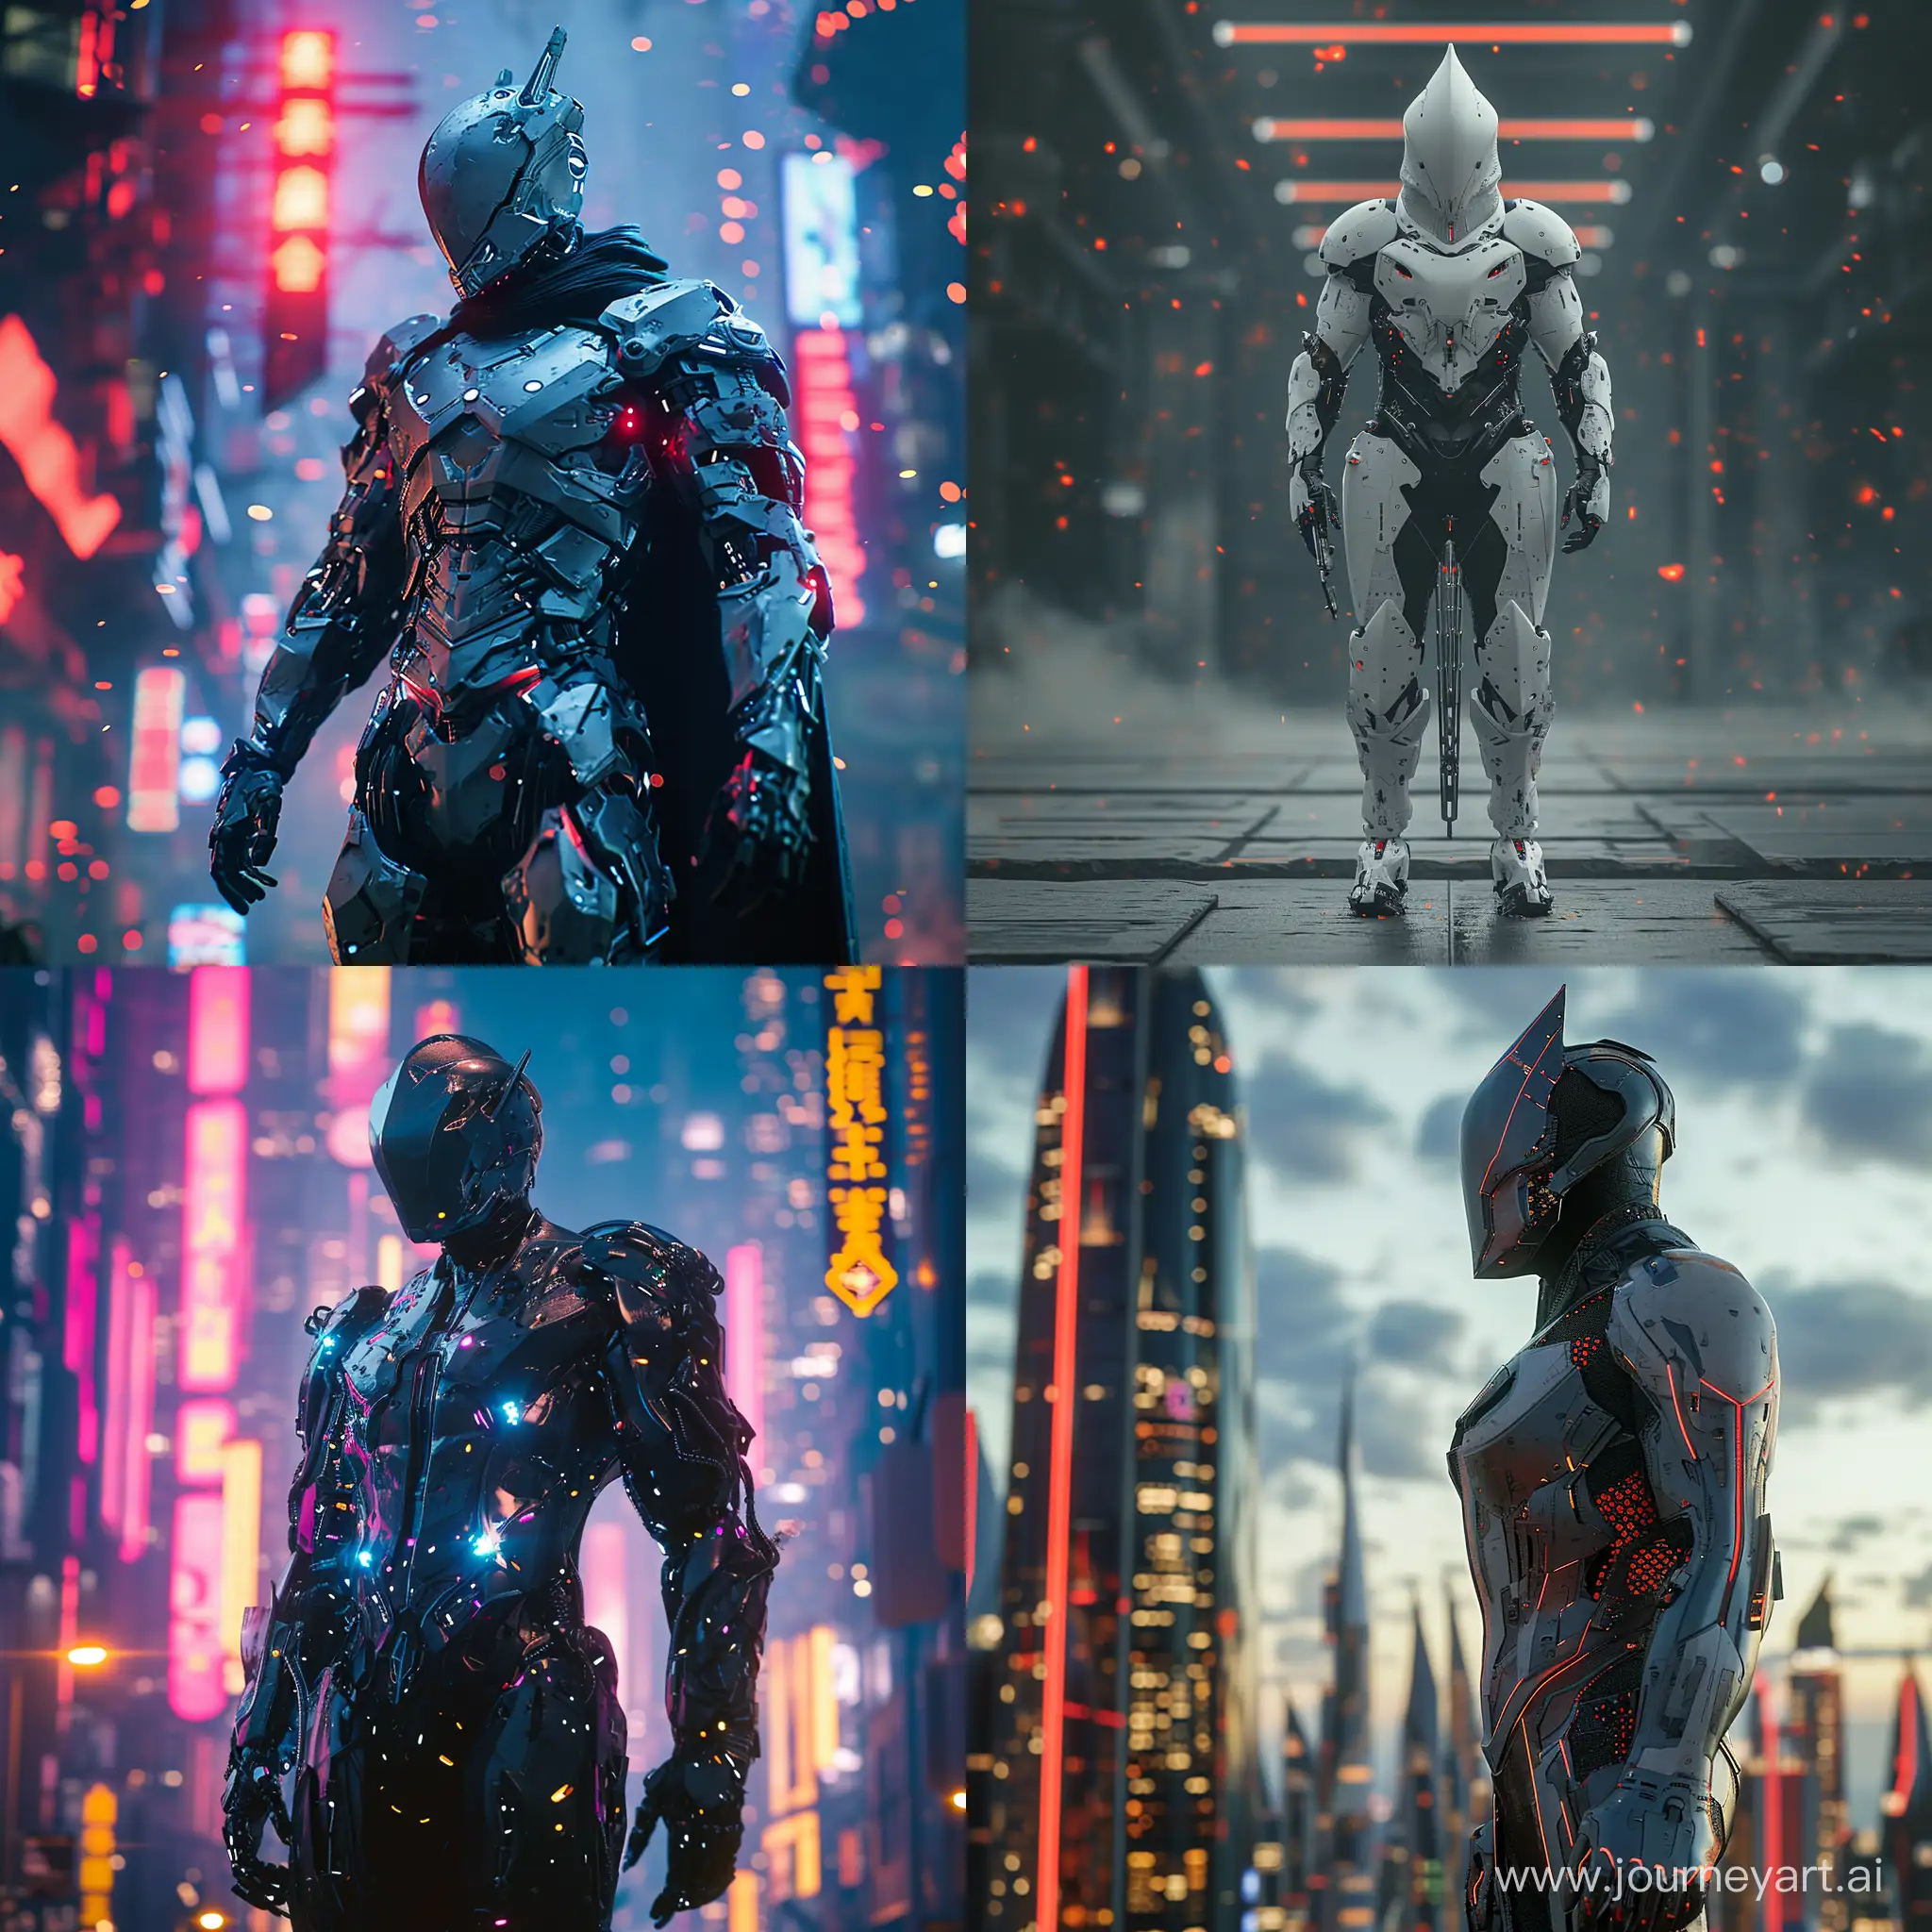 8K, V-Ray, realism, Full length portrait, a cybernetic white knight stands tall in unusual armor, in cyberpunk style, ::1.1, on the background explosion of colors, epic, cool, movie moment, epic shot